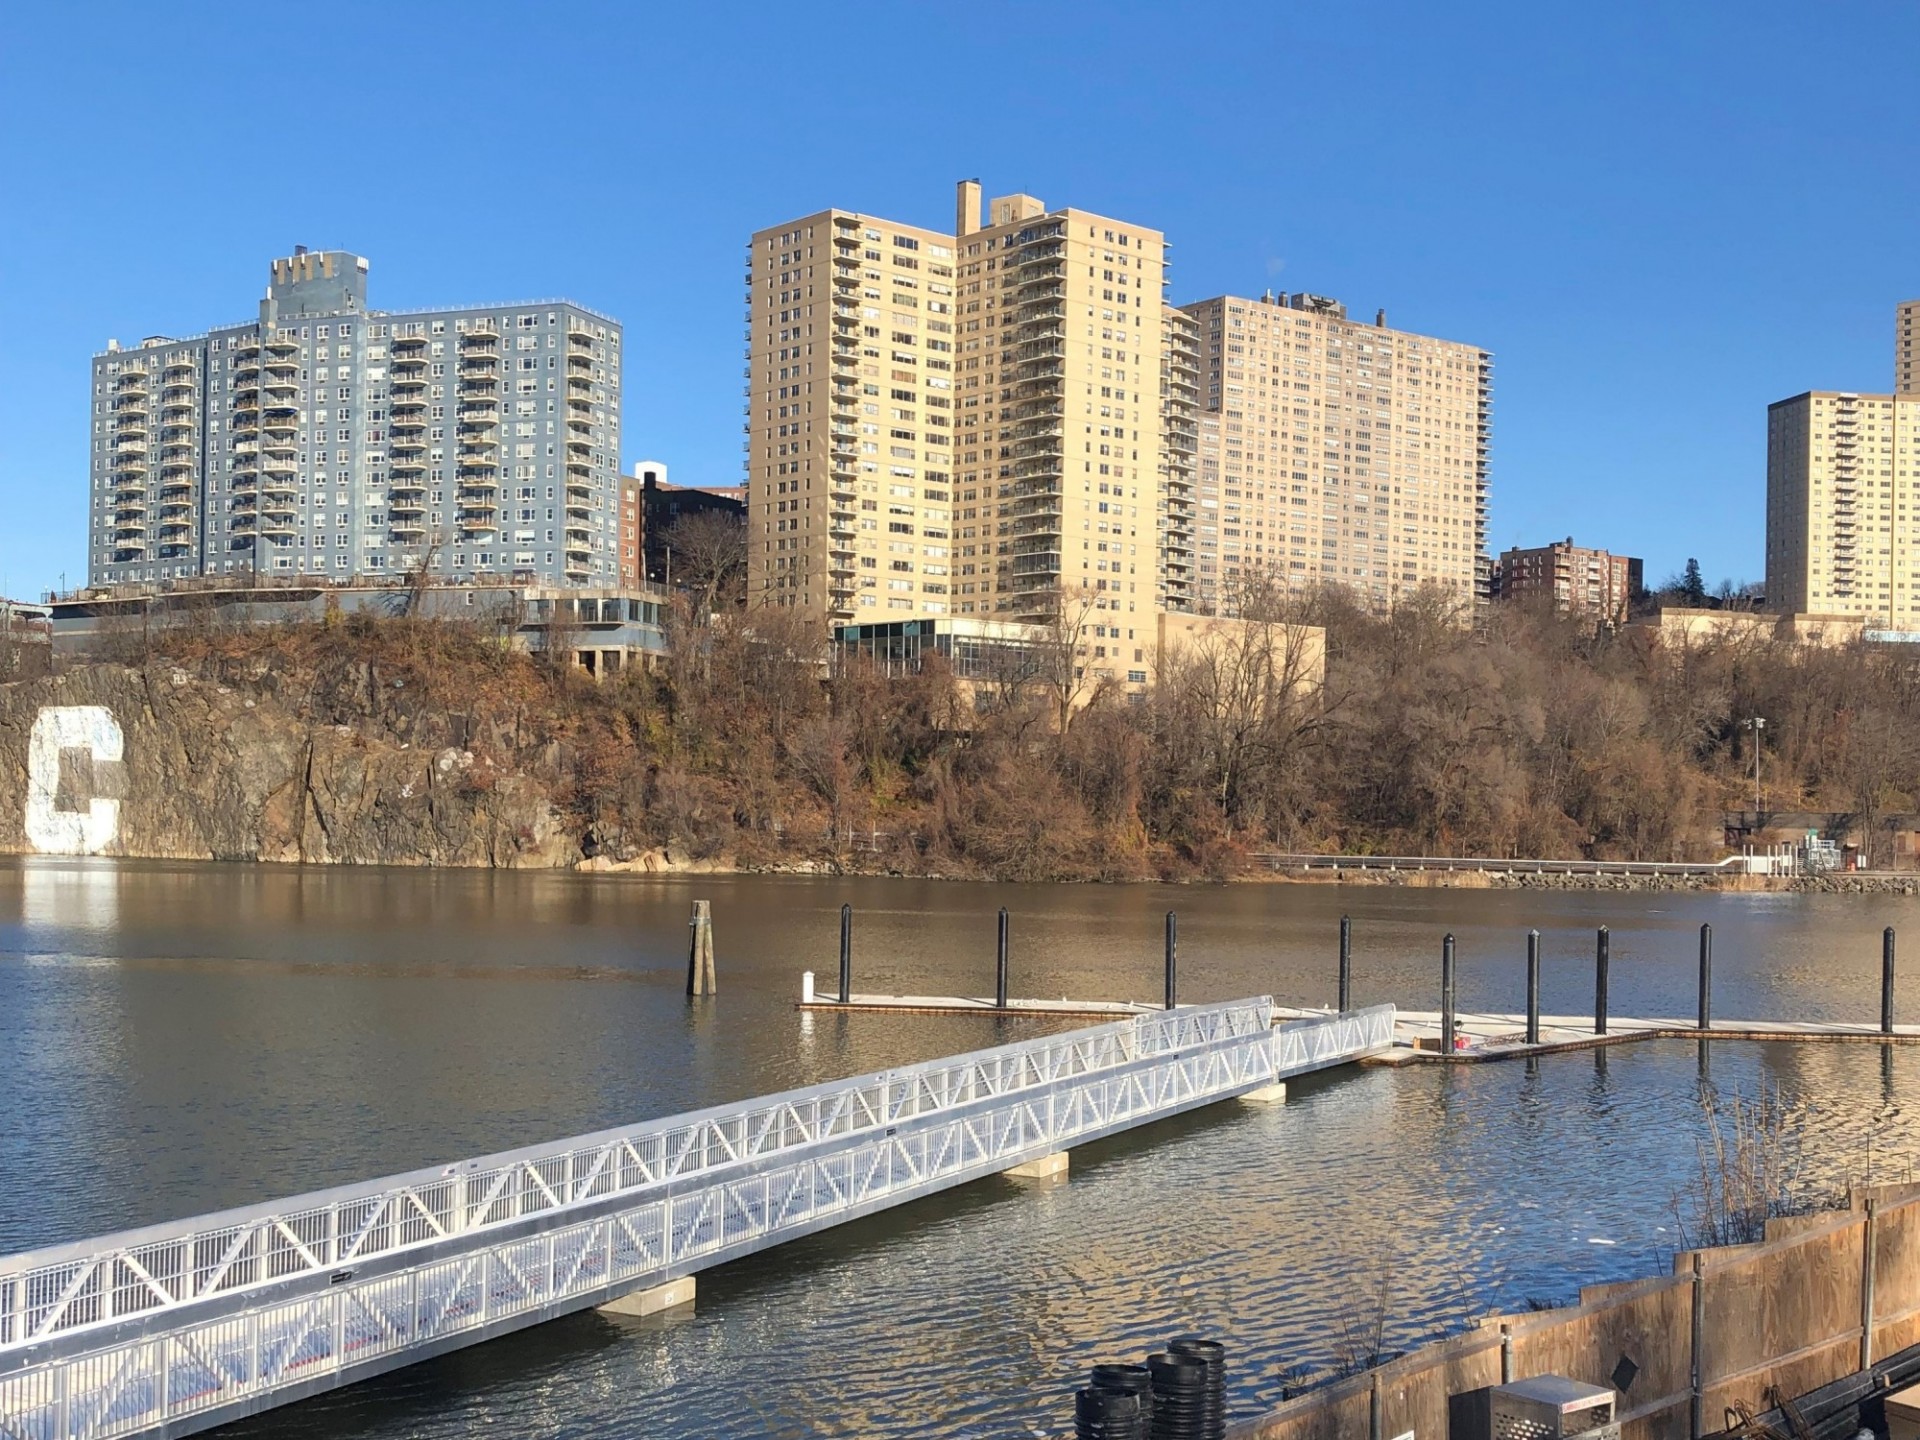 A long metal dock that extends into the Harlem River, with apartment buildings on the other side of the shore.